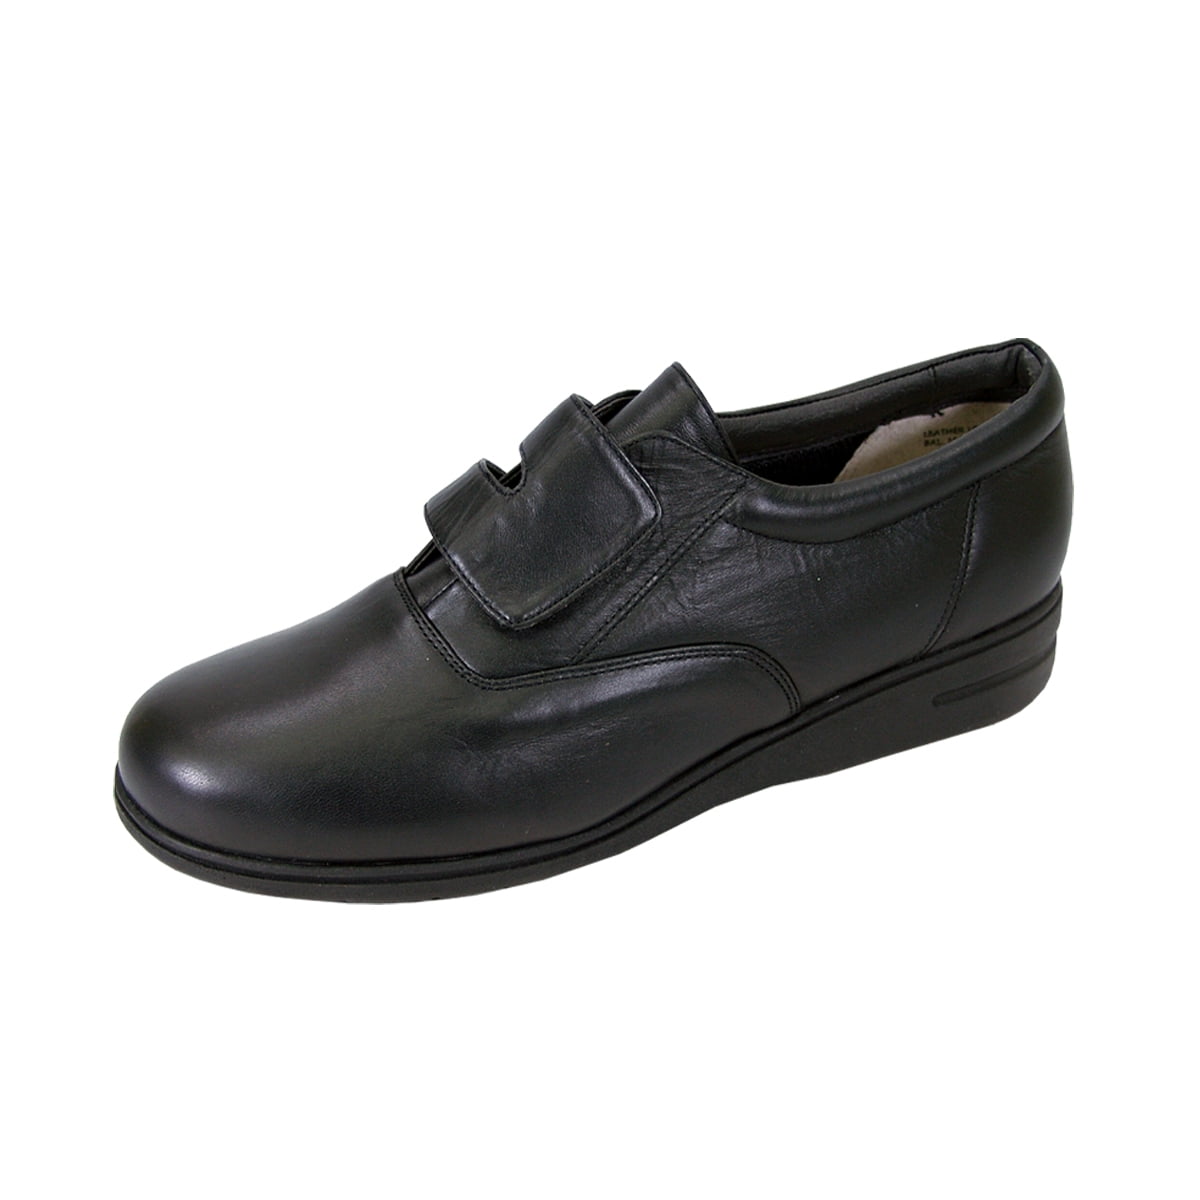 comfortable wide width work shoes